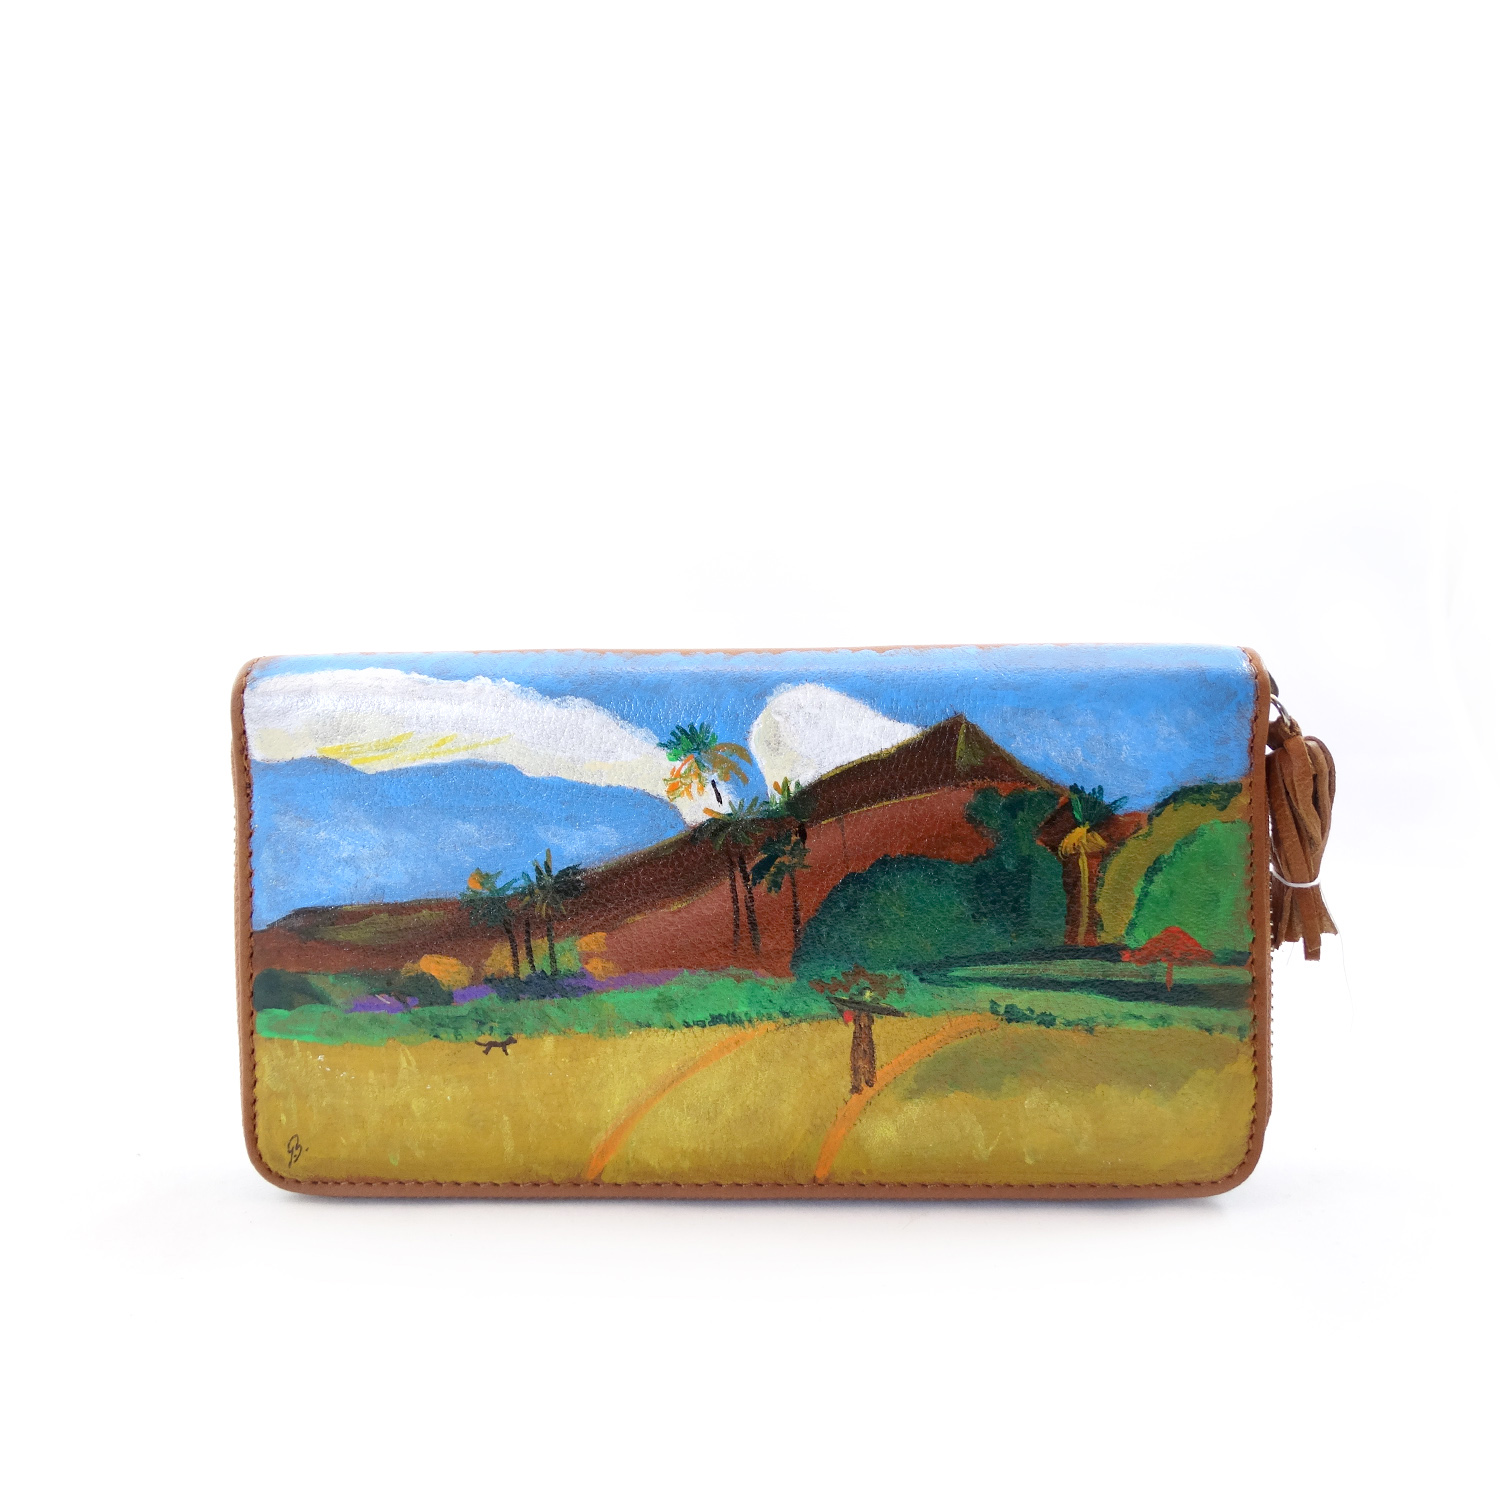 Hand painted wallet - Tahitian Landscape by Gauguin